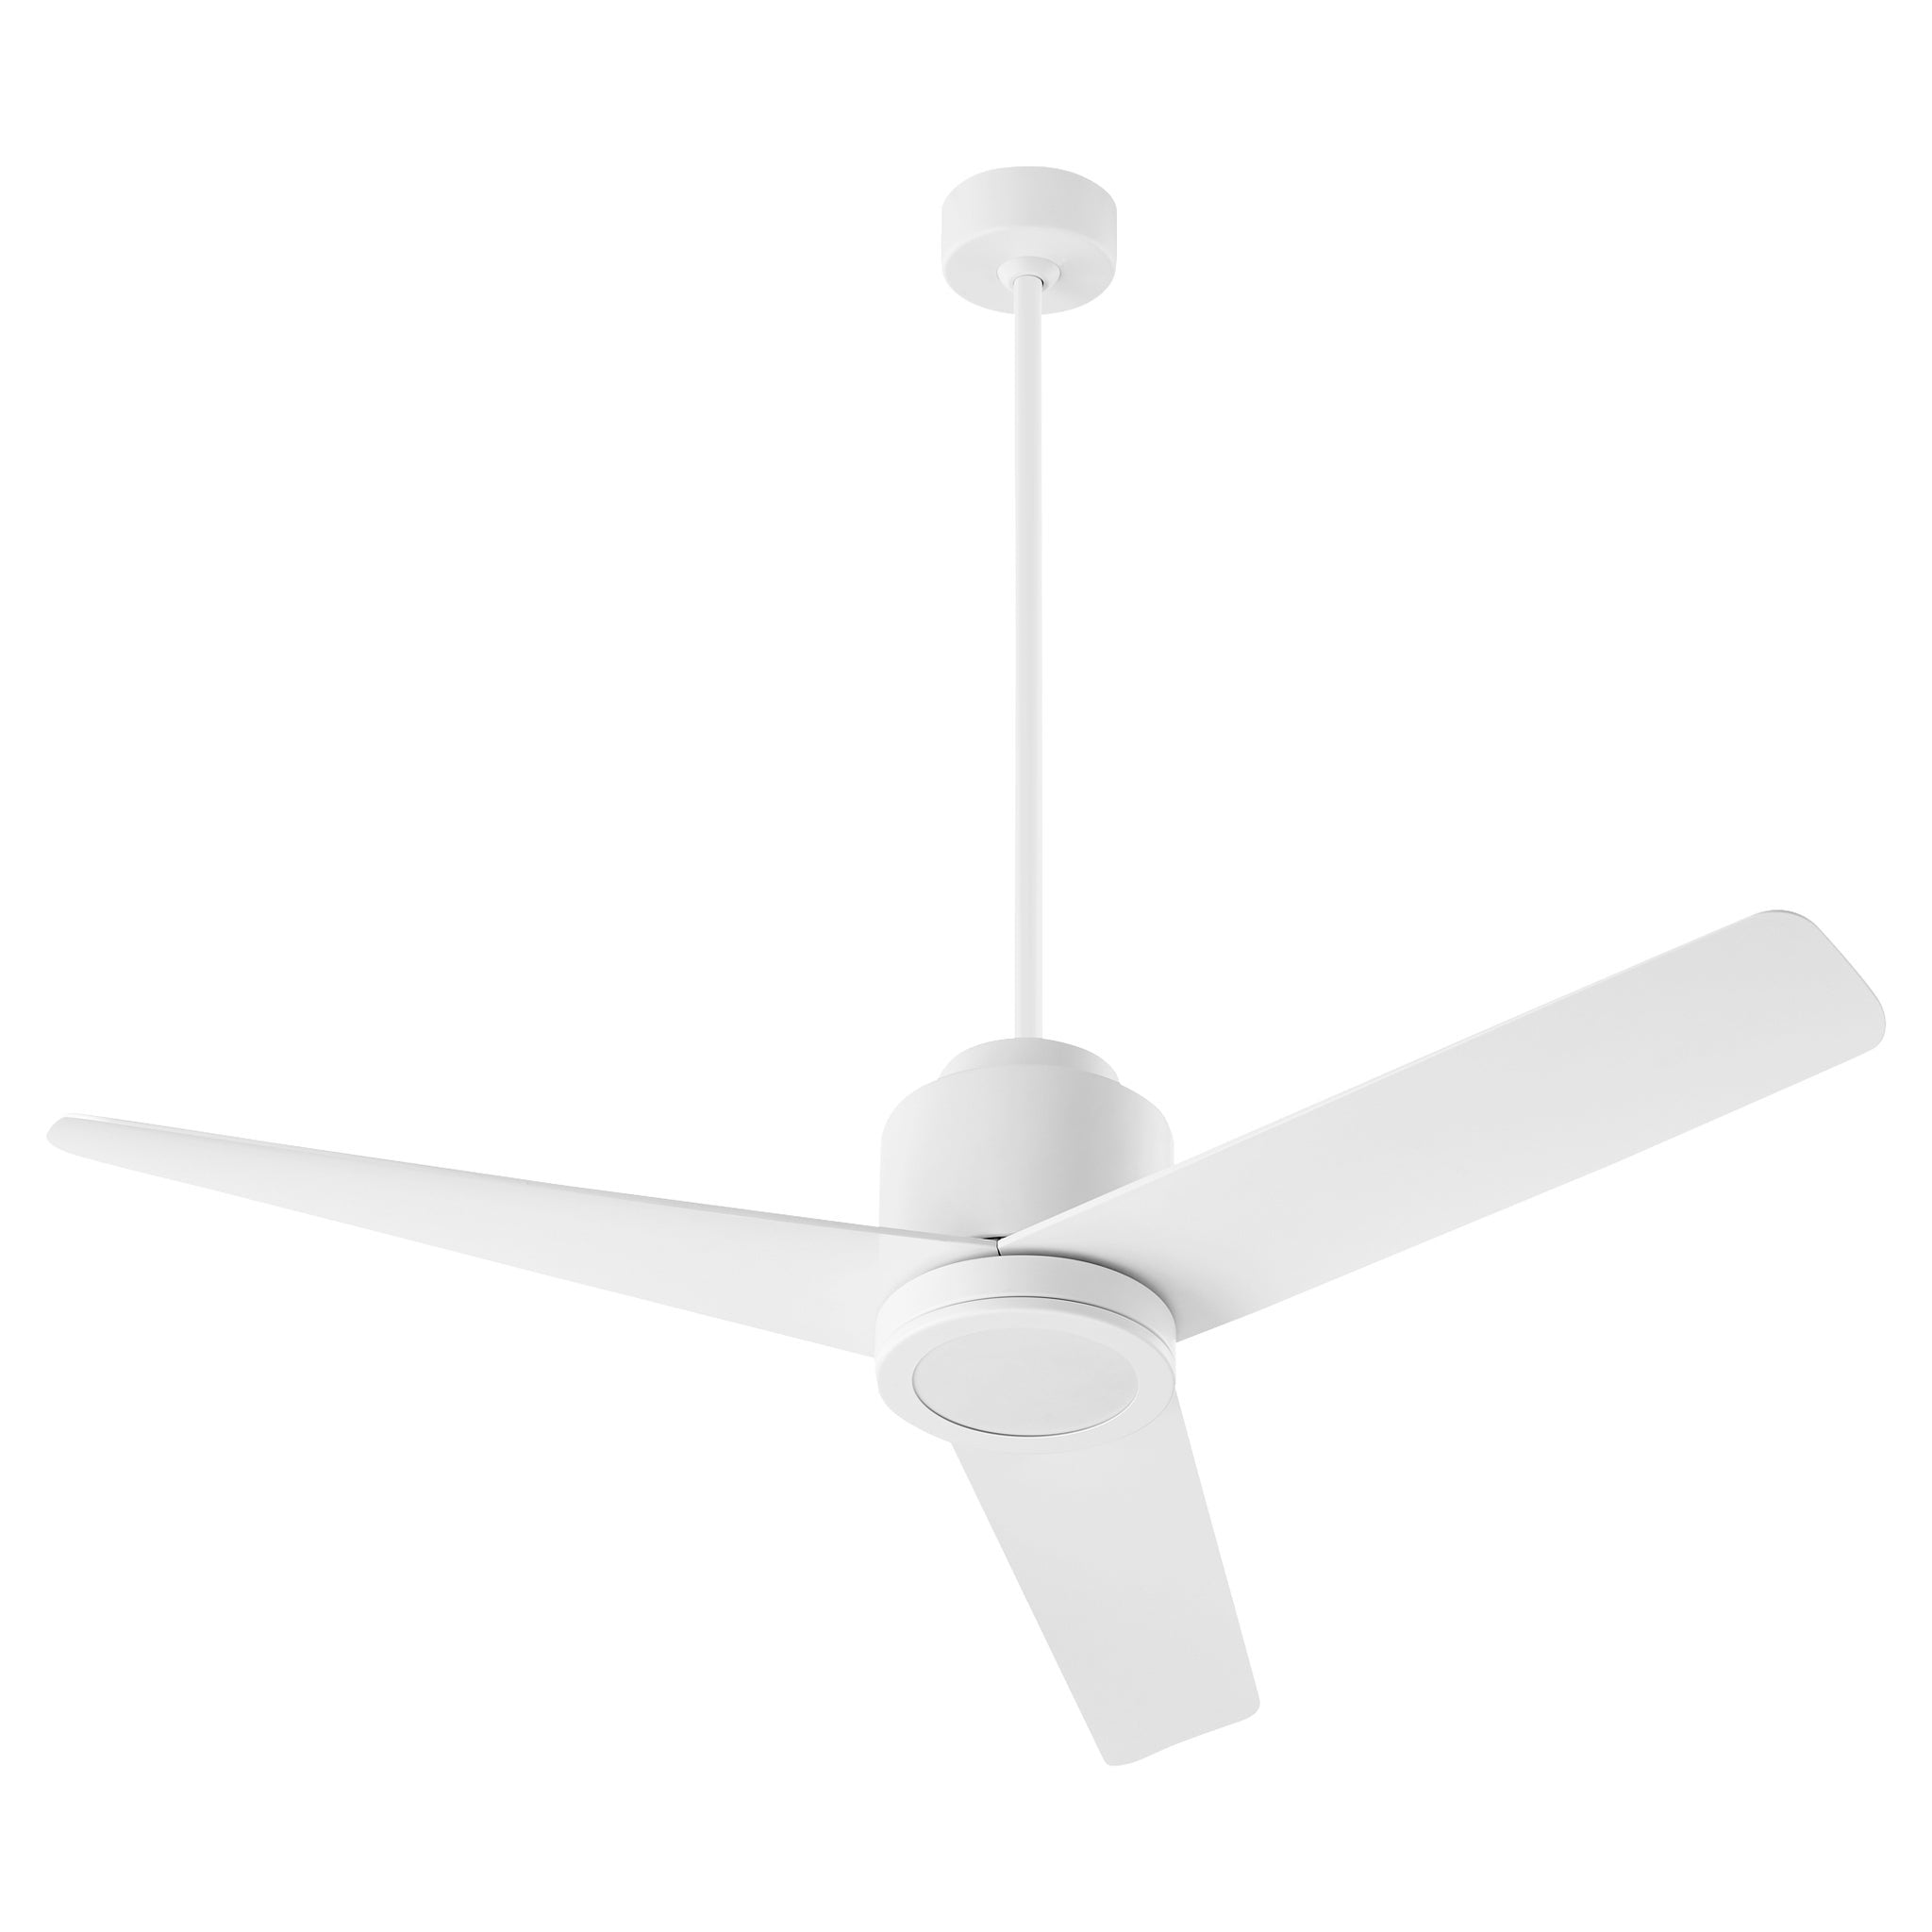 Oxygen ADORA Ceiling Fan, 52 Inch Blade Span, Wet Rated – Black, Satin Nickel, or White